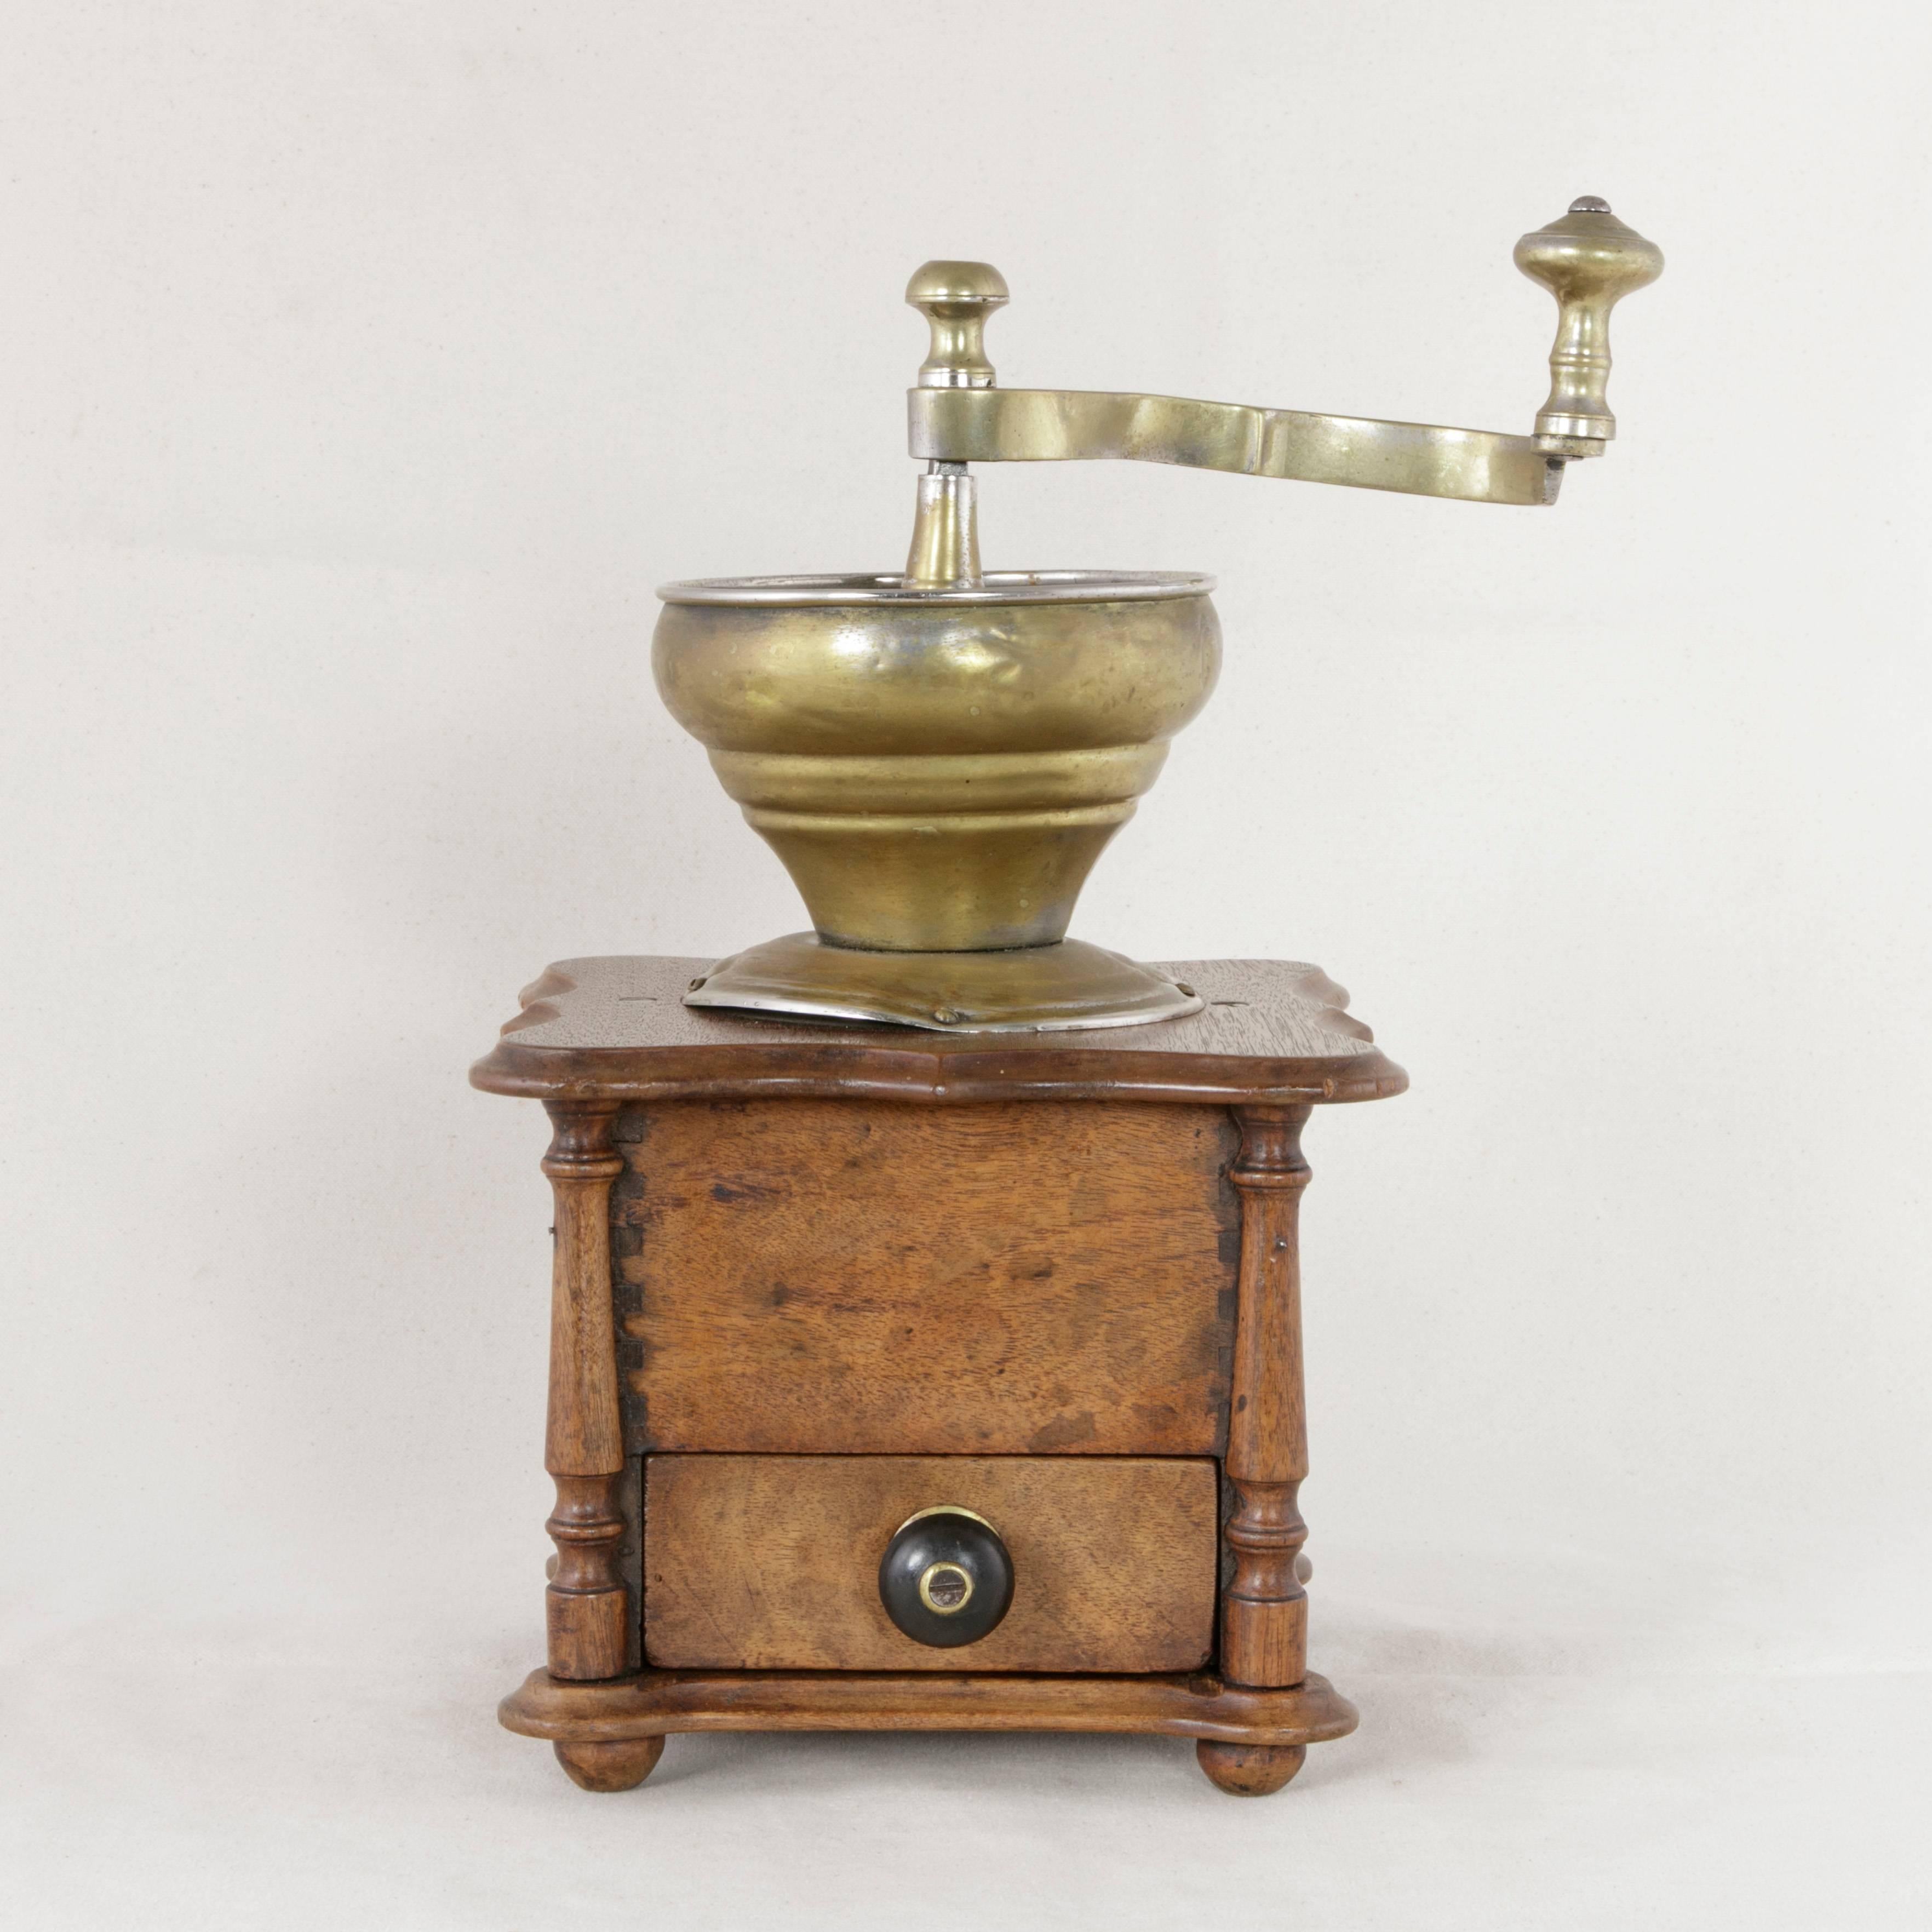 This late 19th century French walnut coffee grinder features a brass funnel at the top where the coffee beans would be introduced and ground by turning its brass crank. A lower drawer with an ebonized wooden knob allowed for retrieval of the